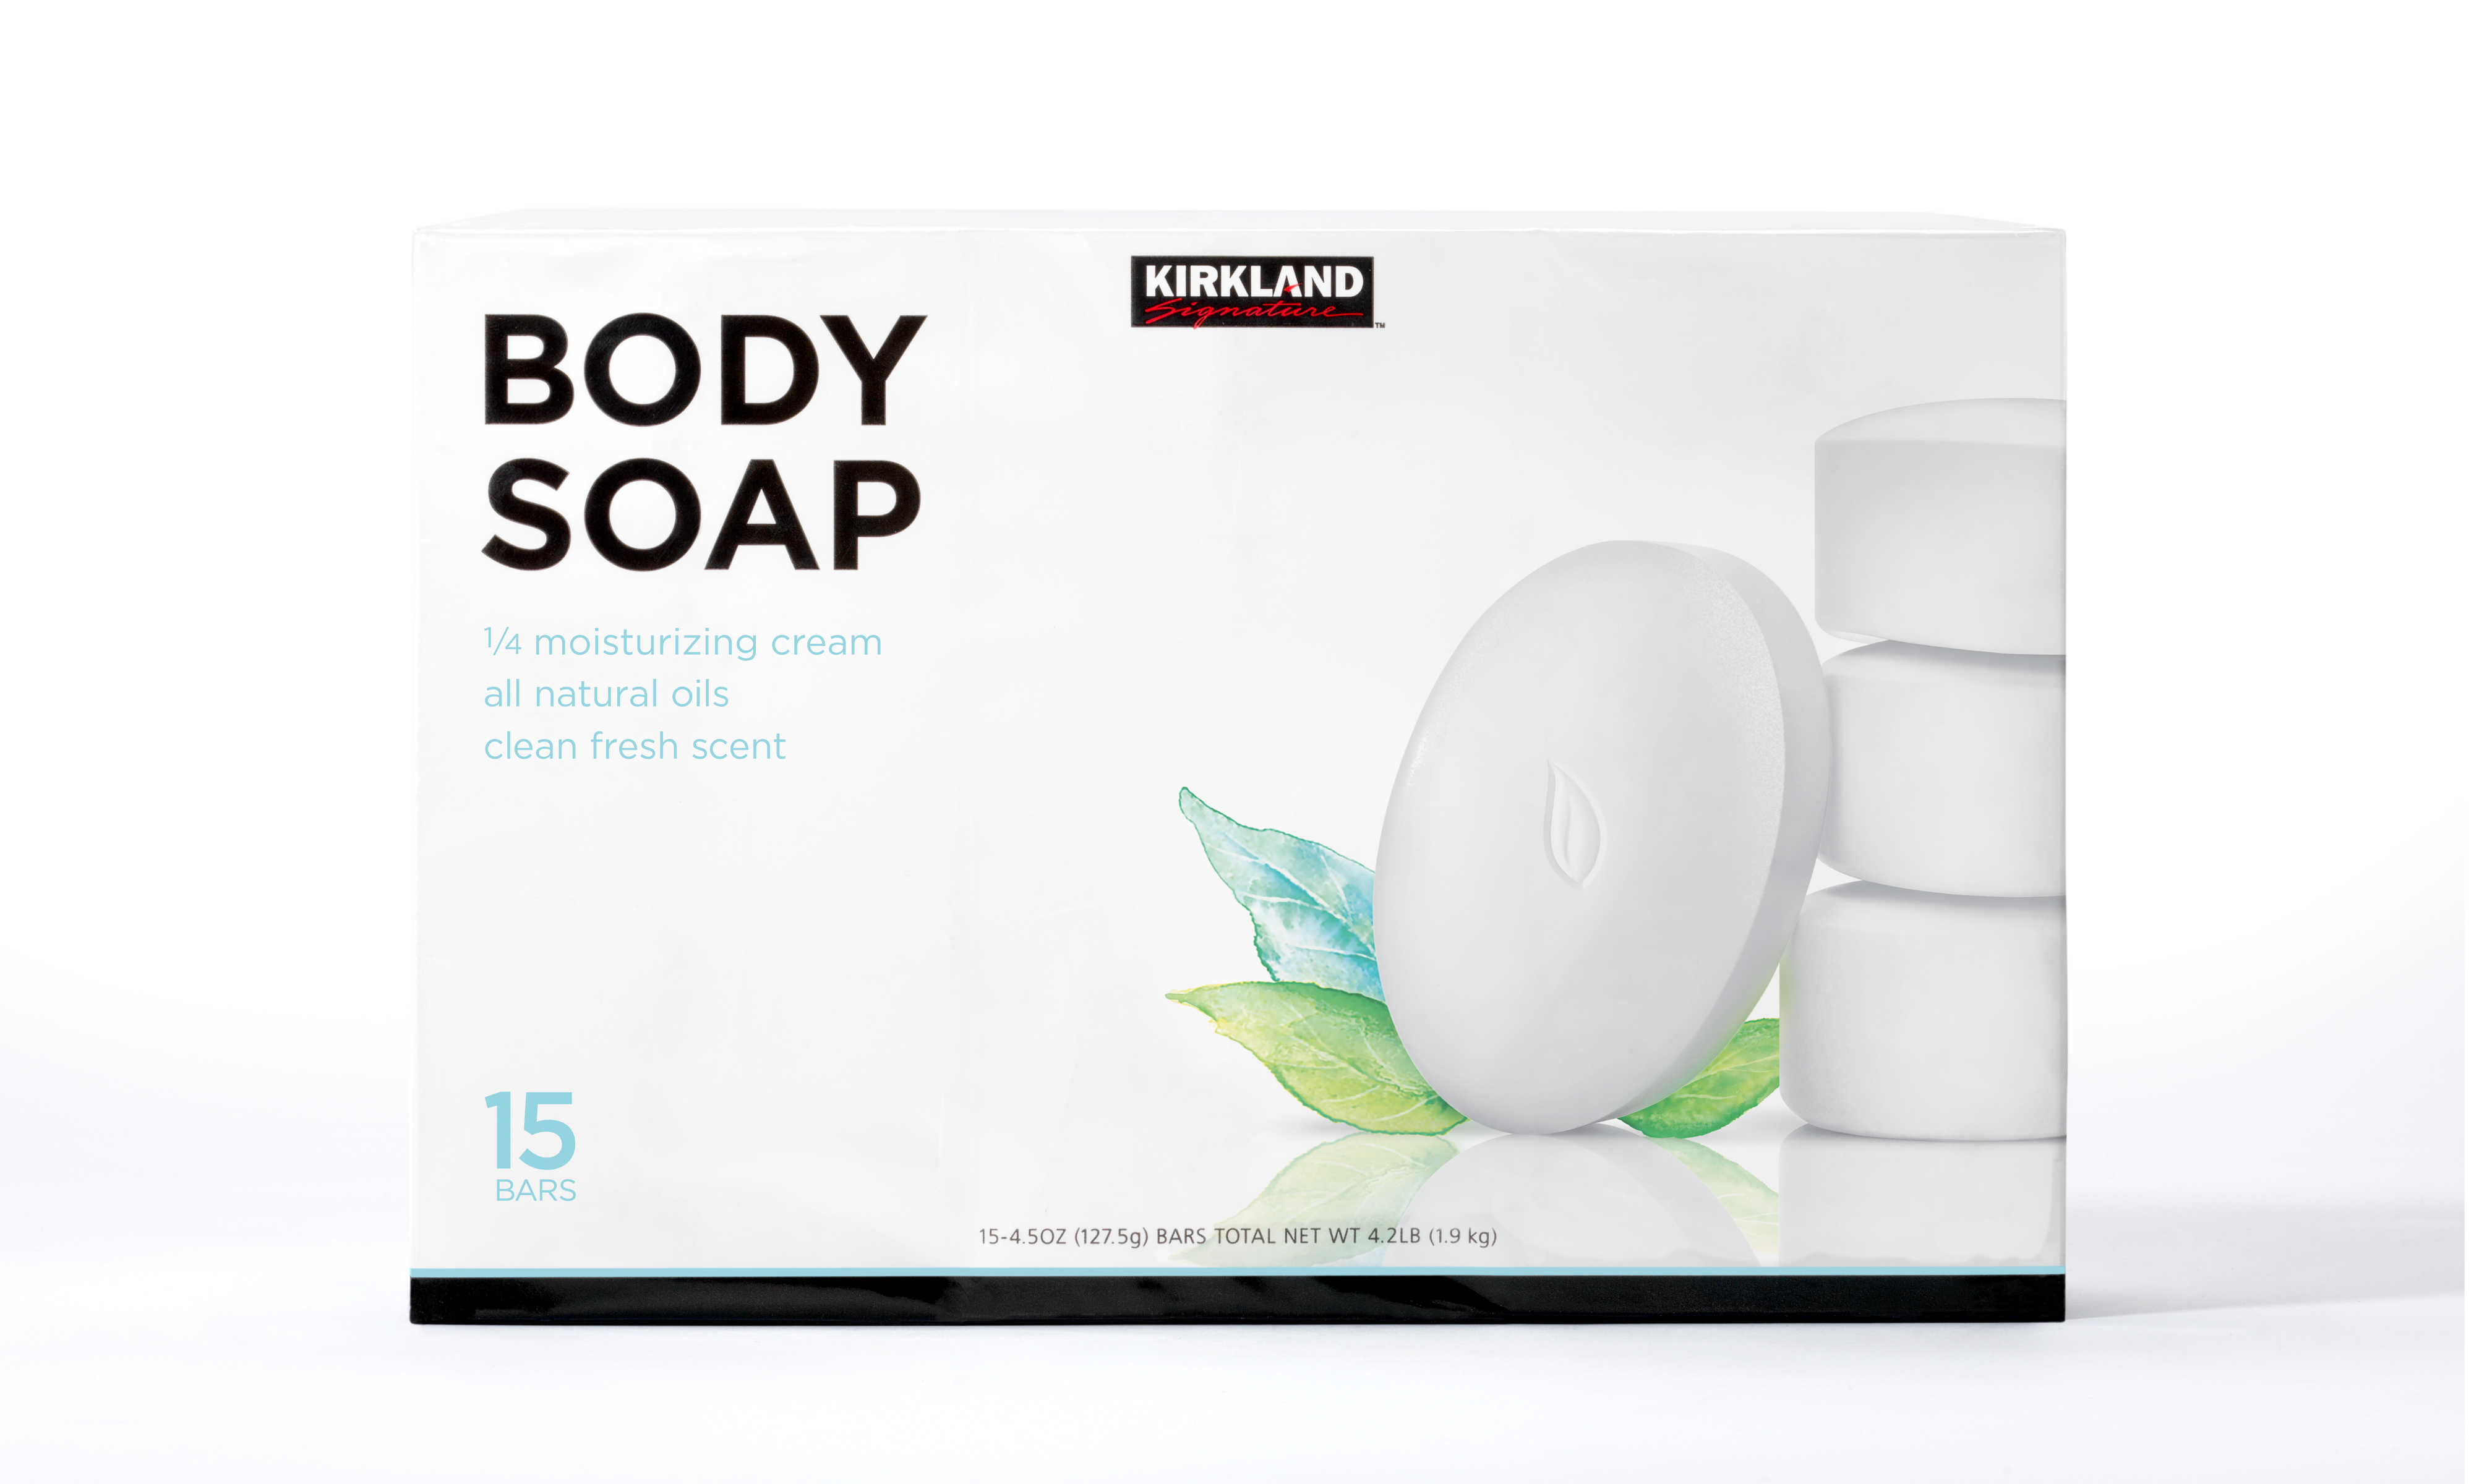 Package of Kirkland Signature Body Soap, featuring an image of a stack of white soap bars with one bar leaning against the stack, and decorative painted blue and green leaves